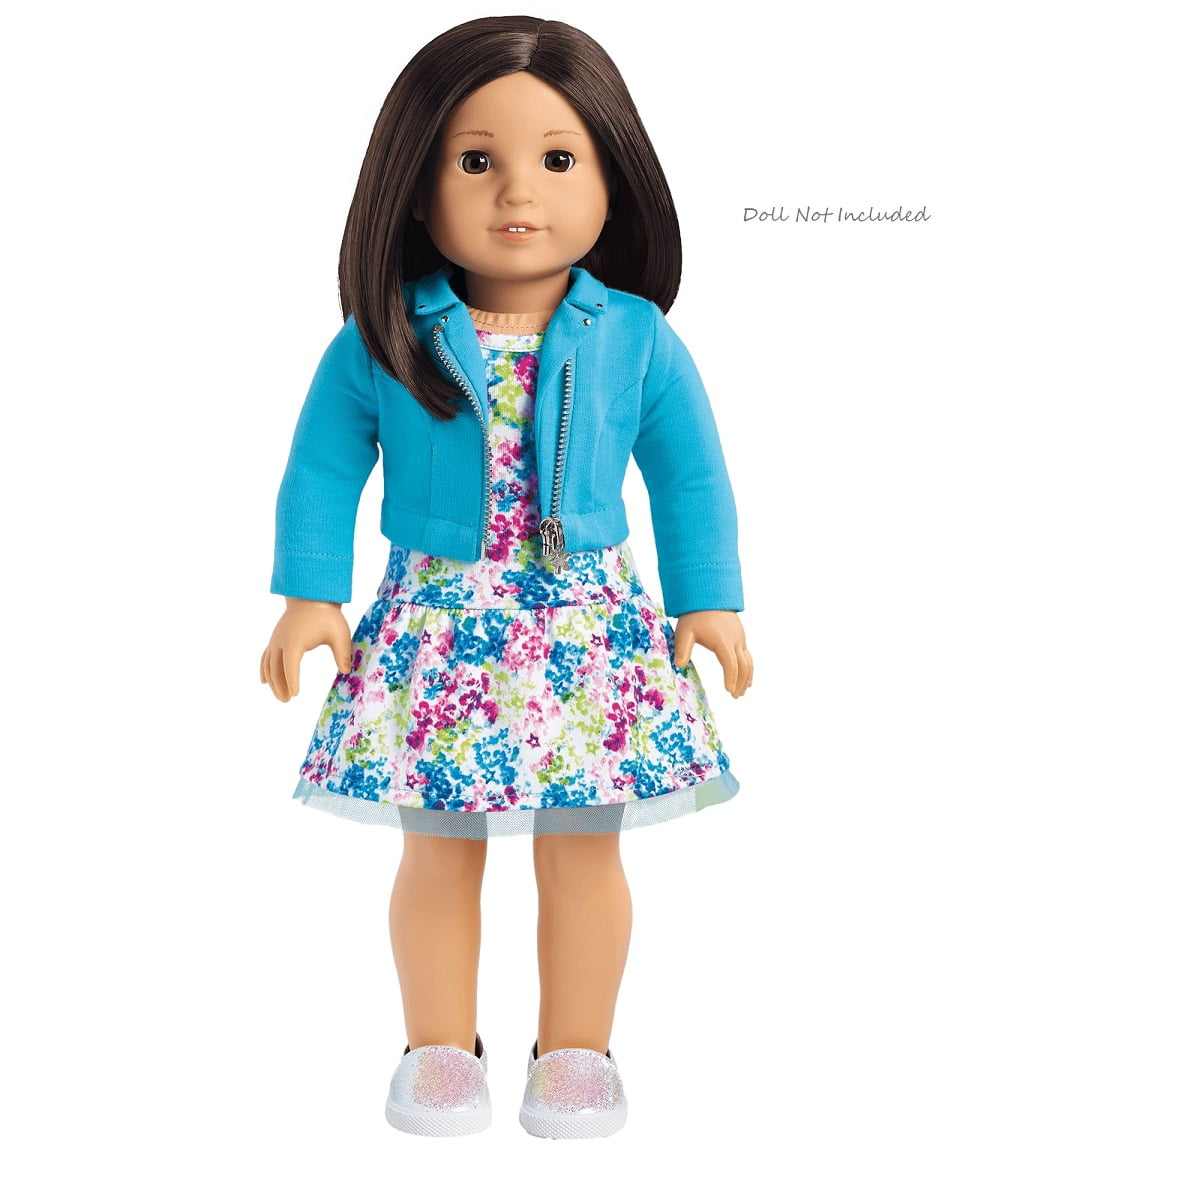 American Girl Truly Me Dot Dress Outfit in Bag for 18 Dolls Doll Not Included